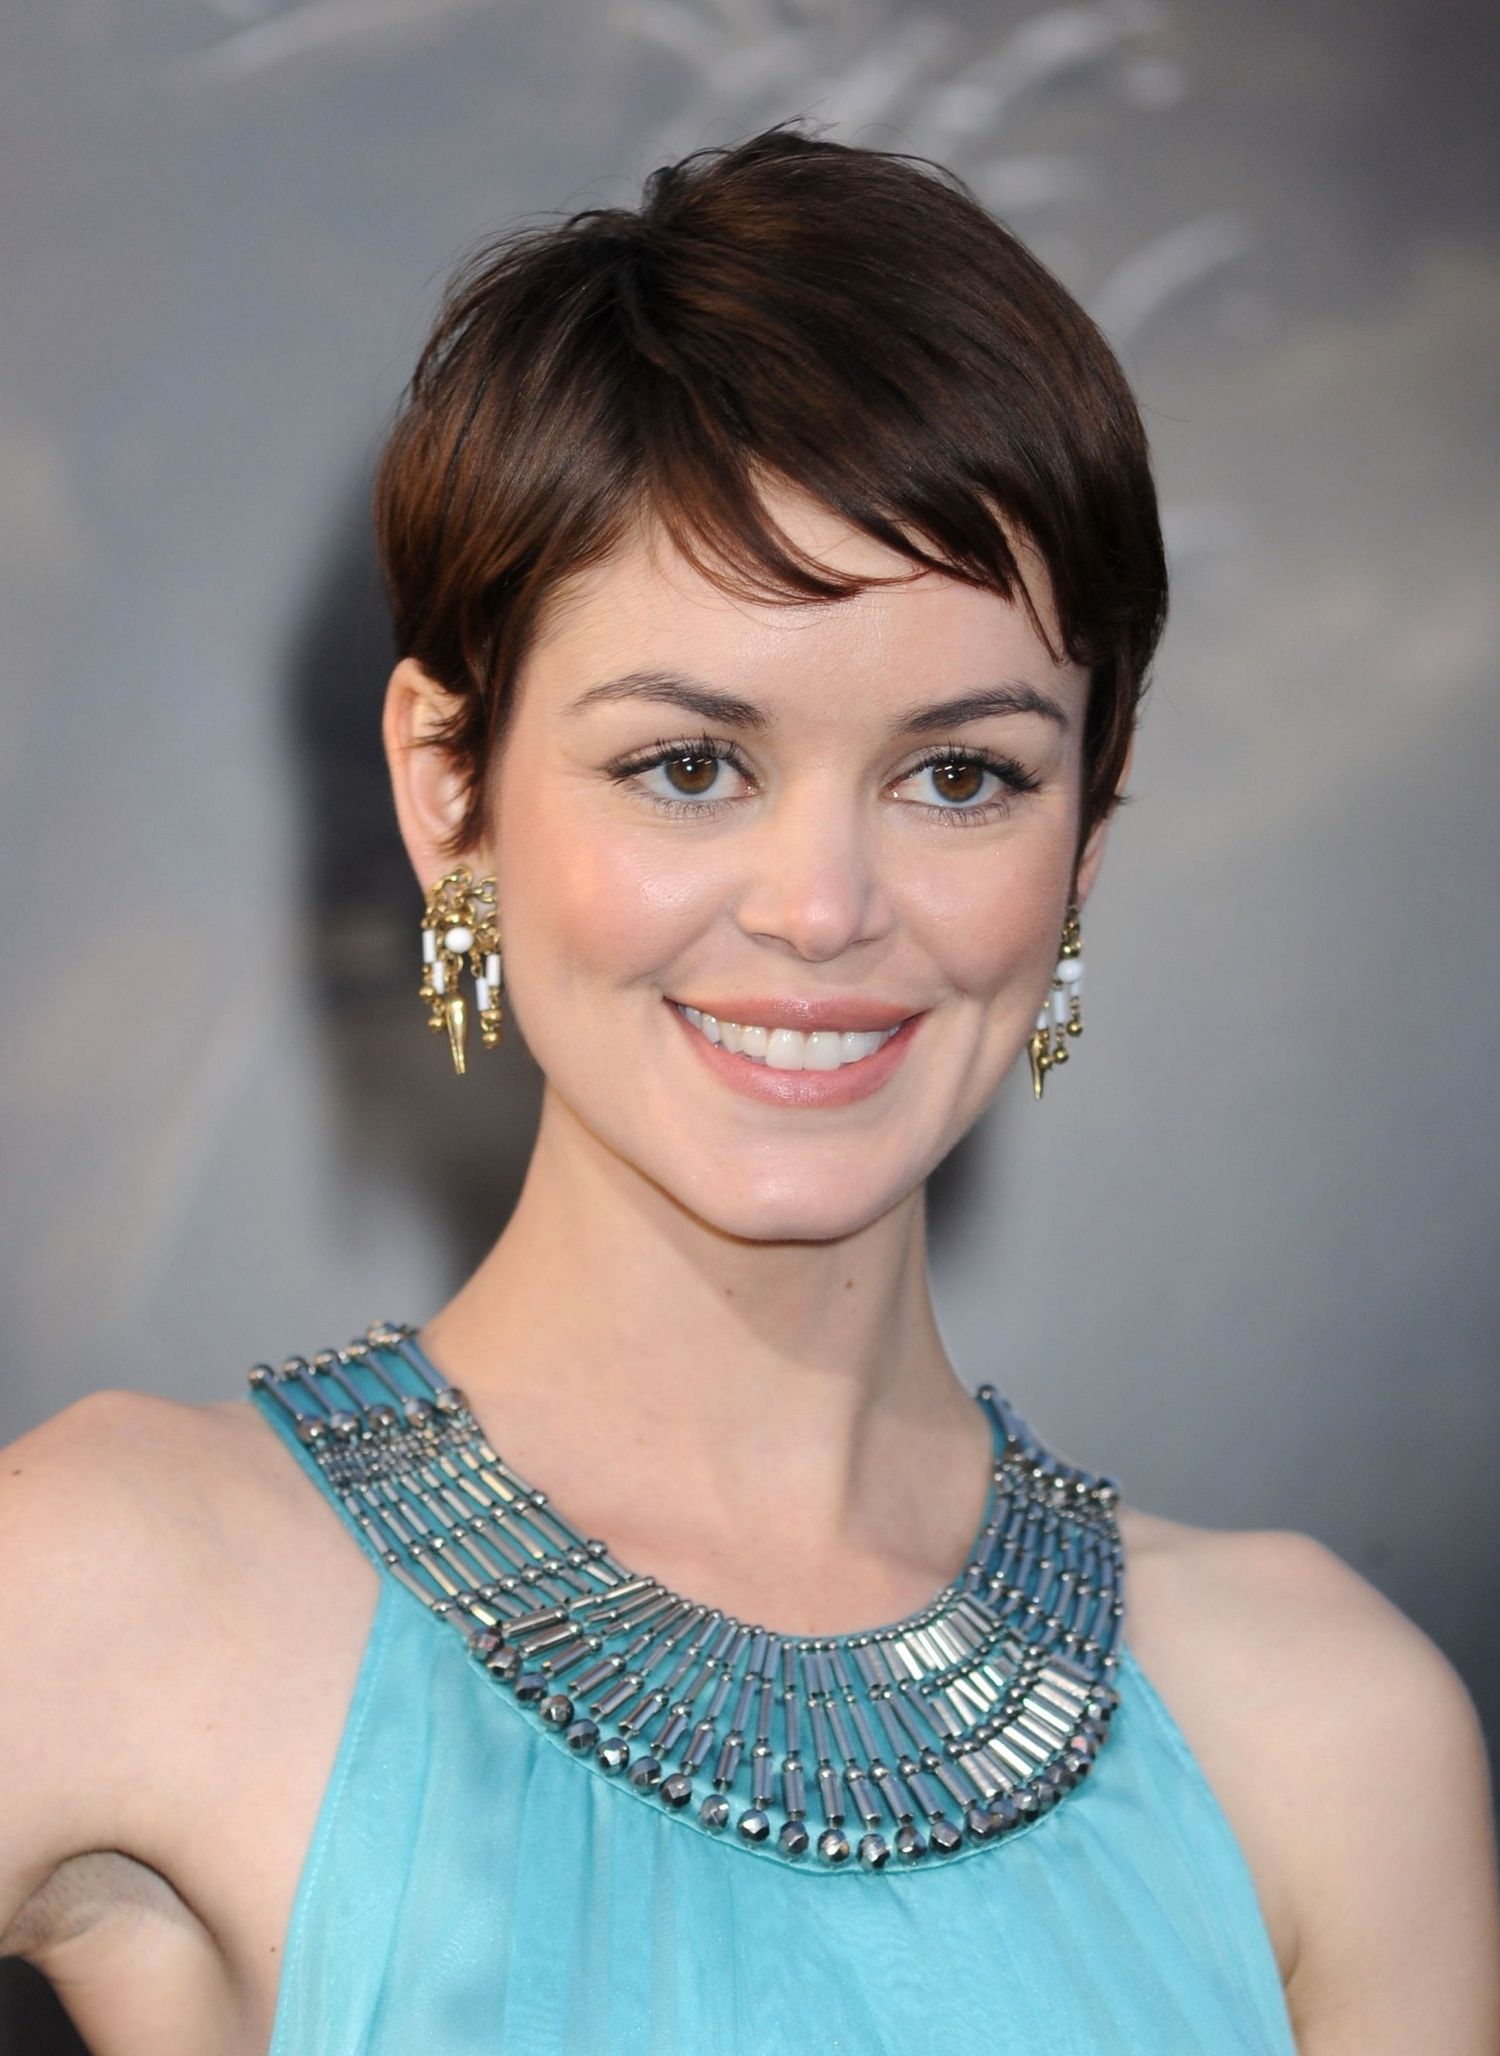 19 Cute Celebrity Haircuts To Consider | Glamour Pertaining To Most Recently Famous Pixie Hairstyles (View 13 of 15)